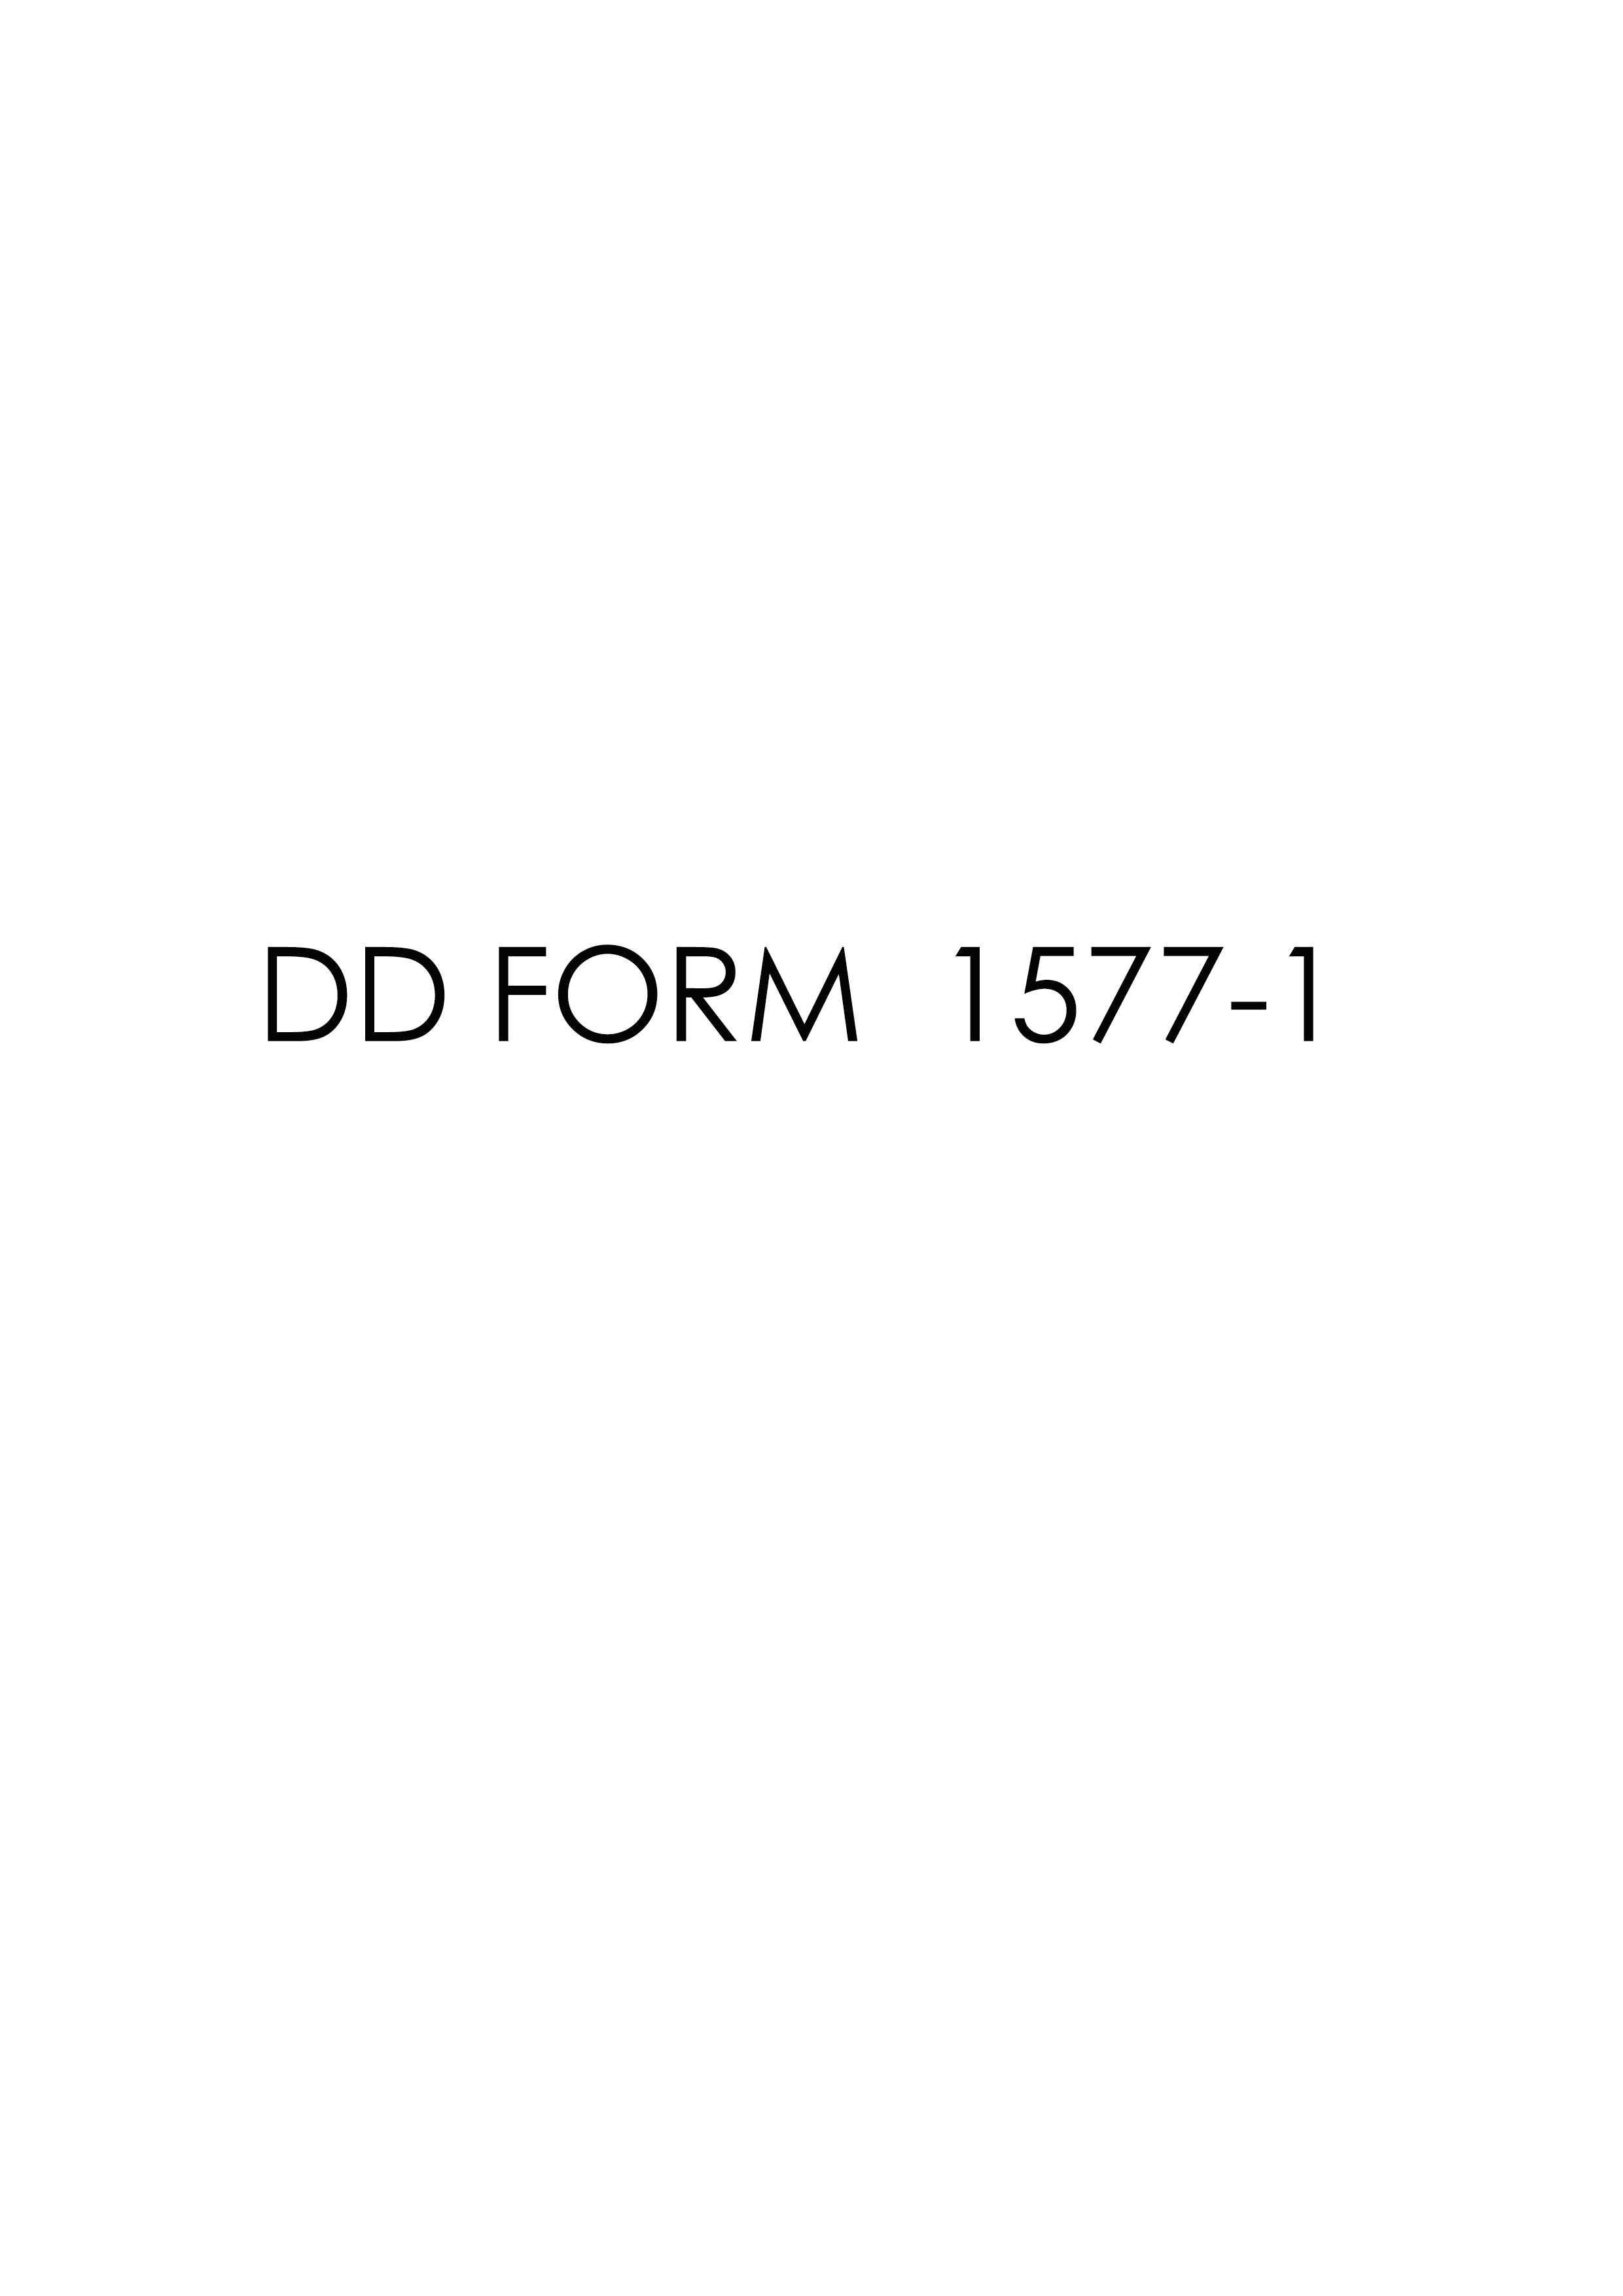 Download Fillable dd Form 1577-1